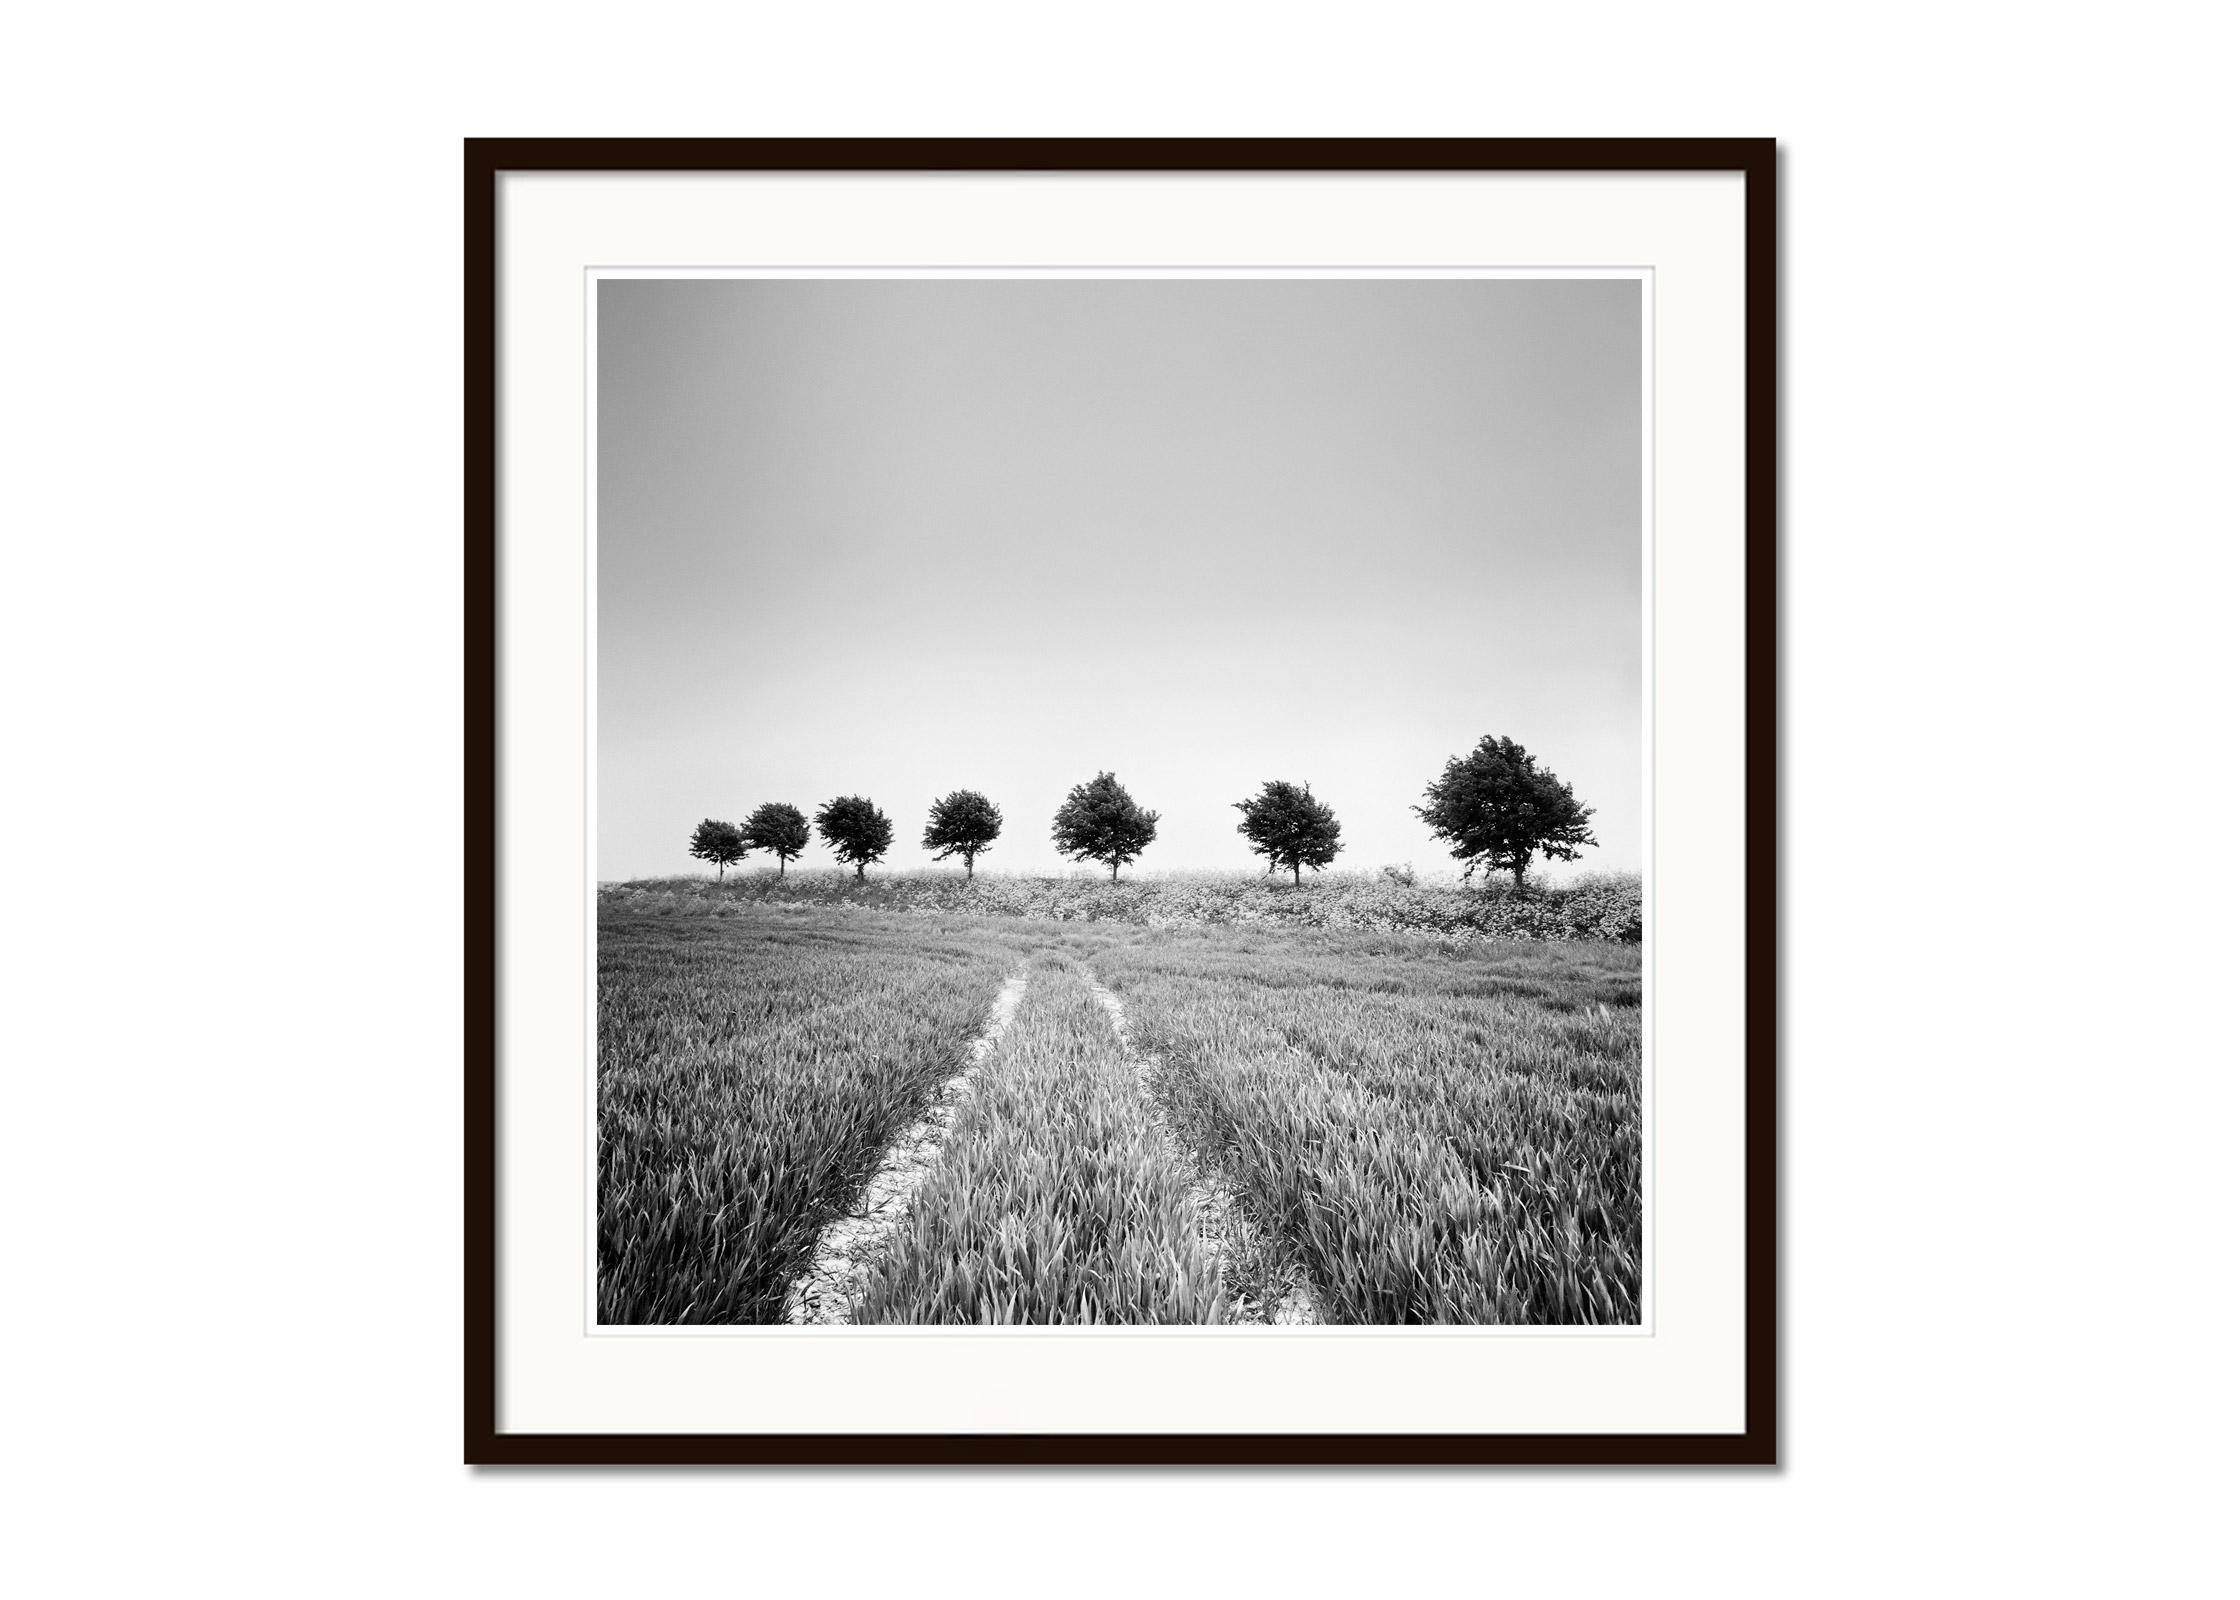 Wheat Field, Tree Avenue, Netherlands, black and white art landscape photography - Gray Black and White Photograph by Gerald Berghammer